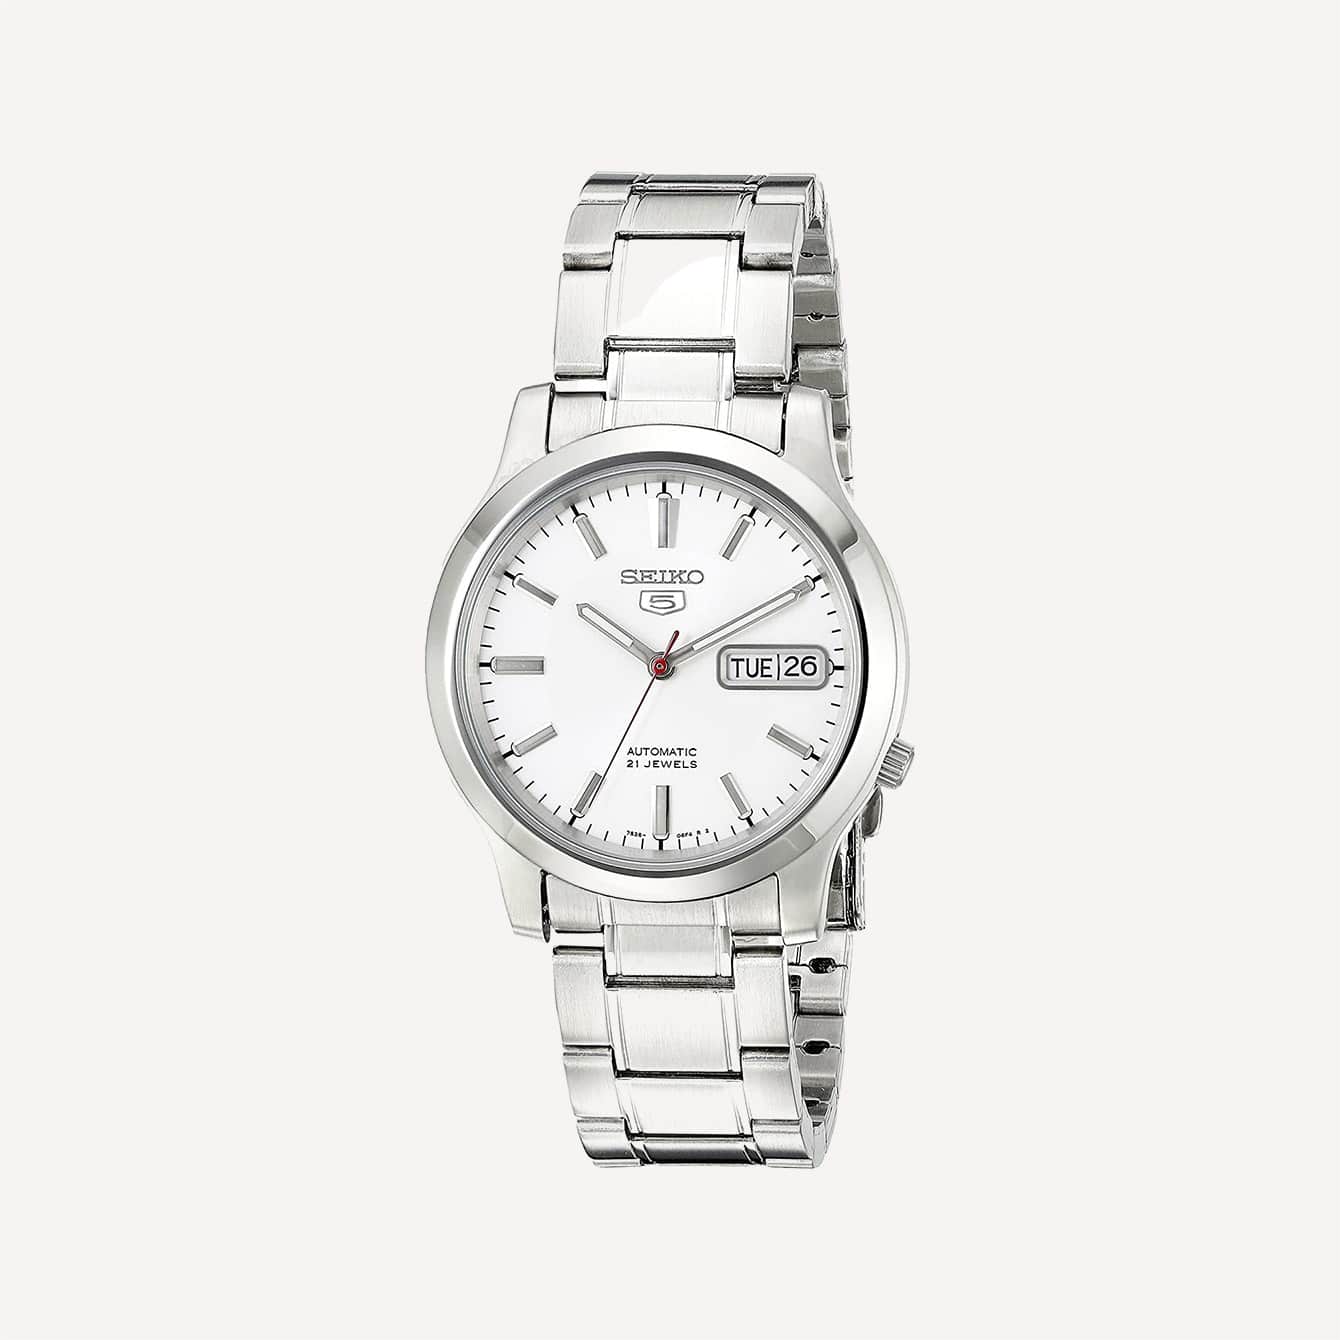 SEIKO 5 Mens SNK789 Automatic Stainless Steel Watch